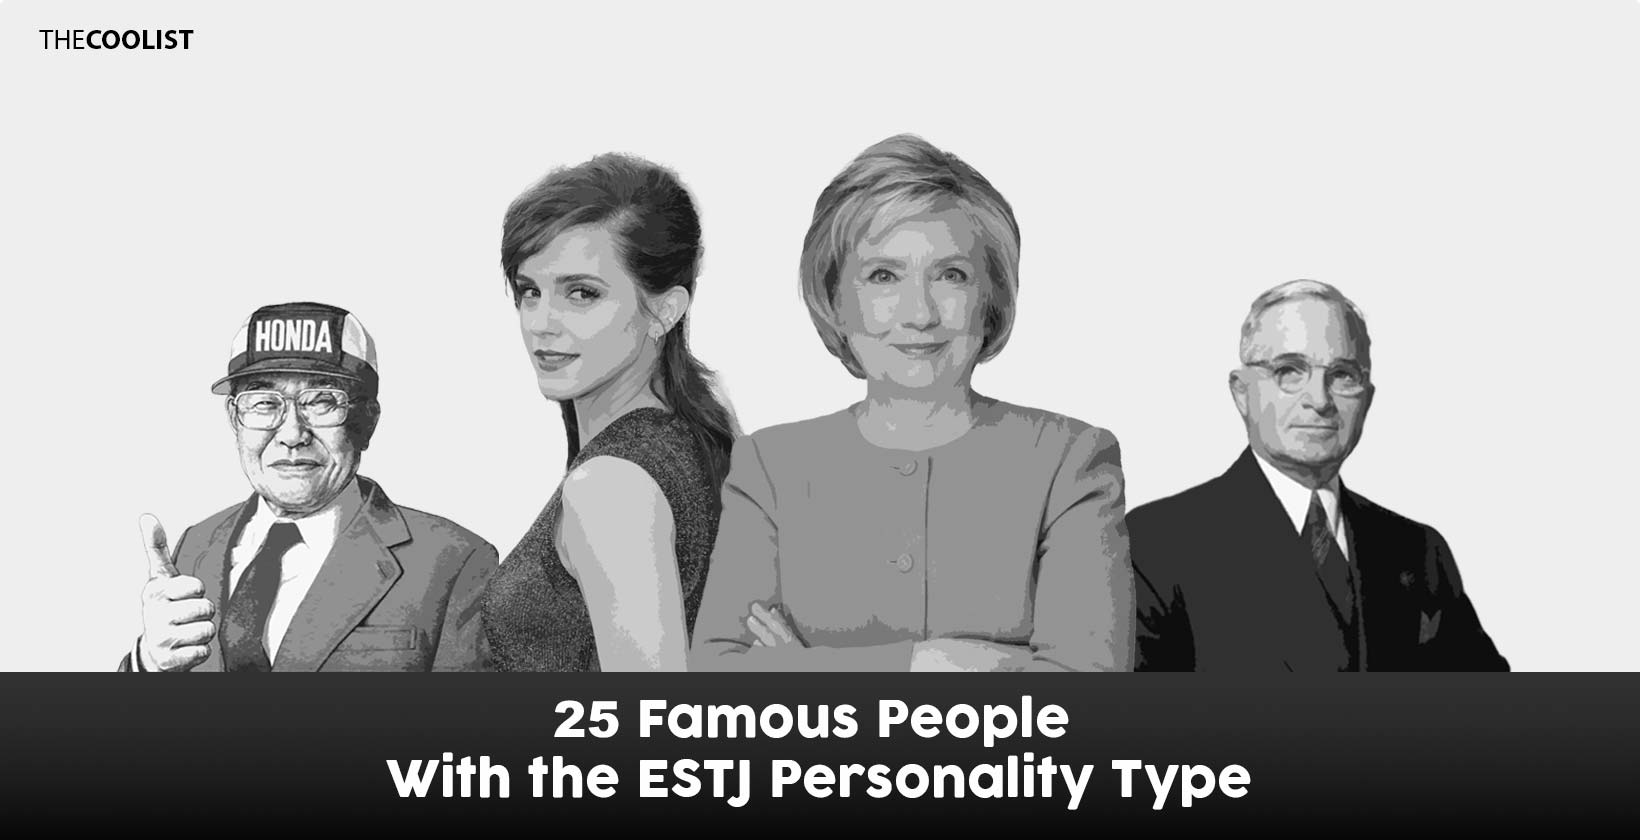 25 Famous ESTJ People and Fictional Characters